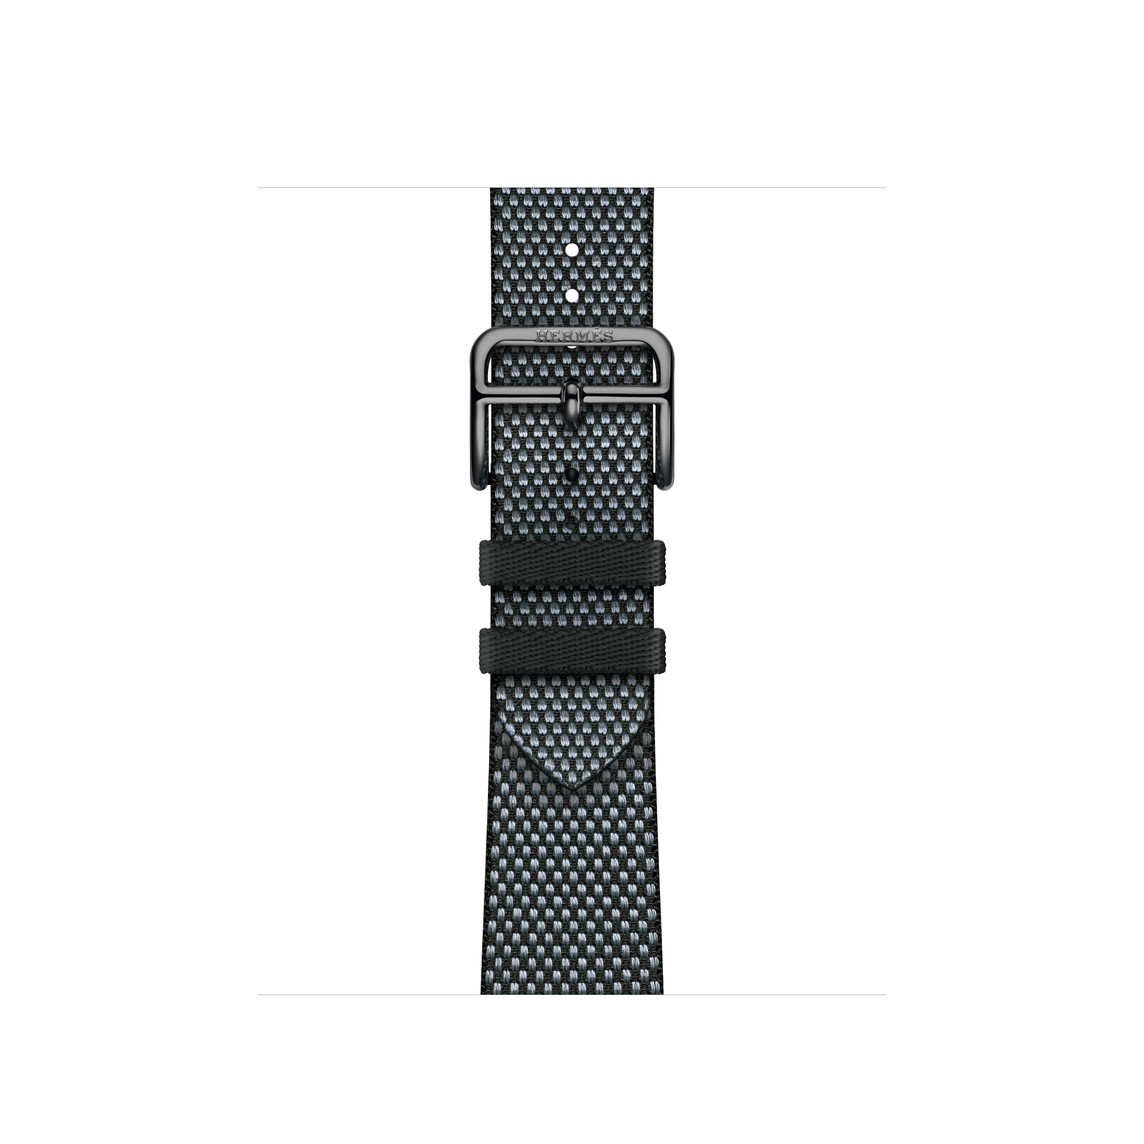 Noir (black) and Denim (blue) Toile H Single Tour strap, woven textile with silver stainless steel buckle.